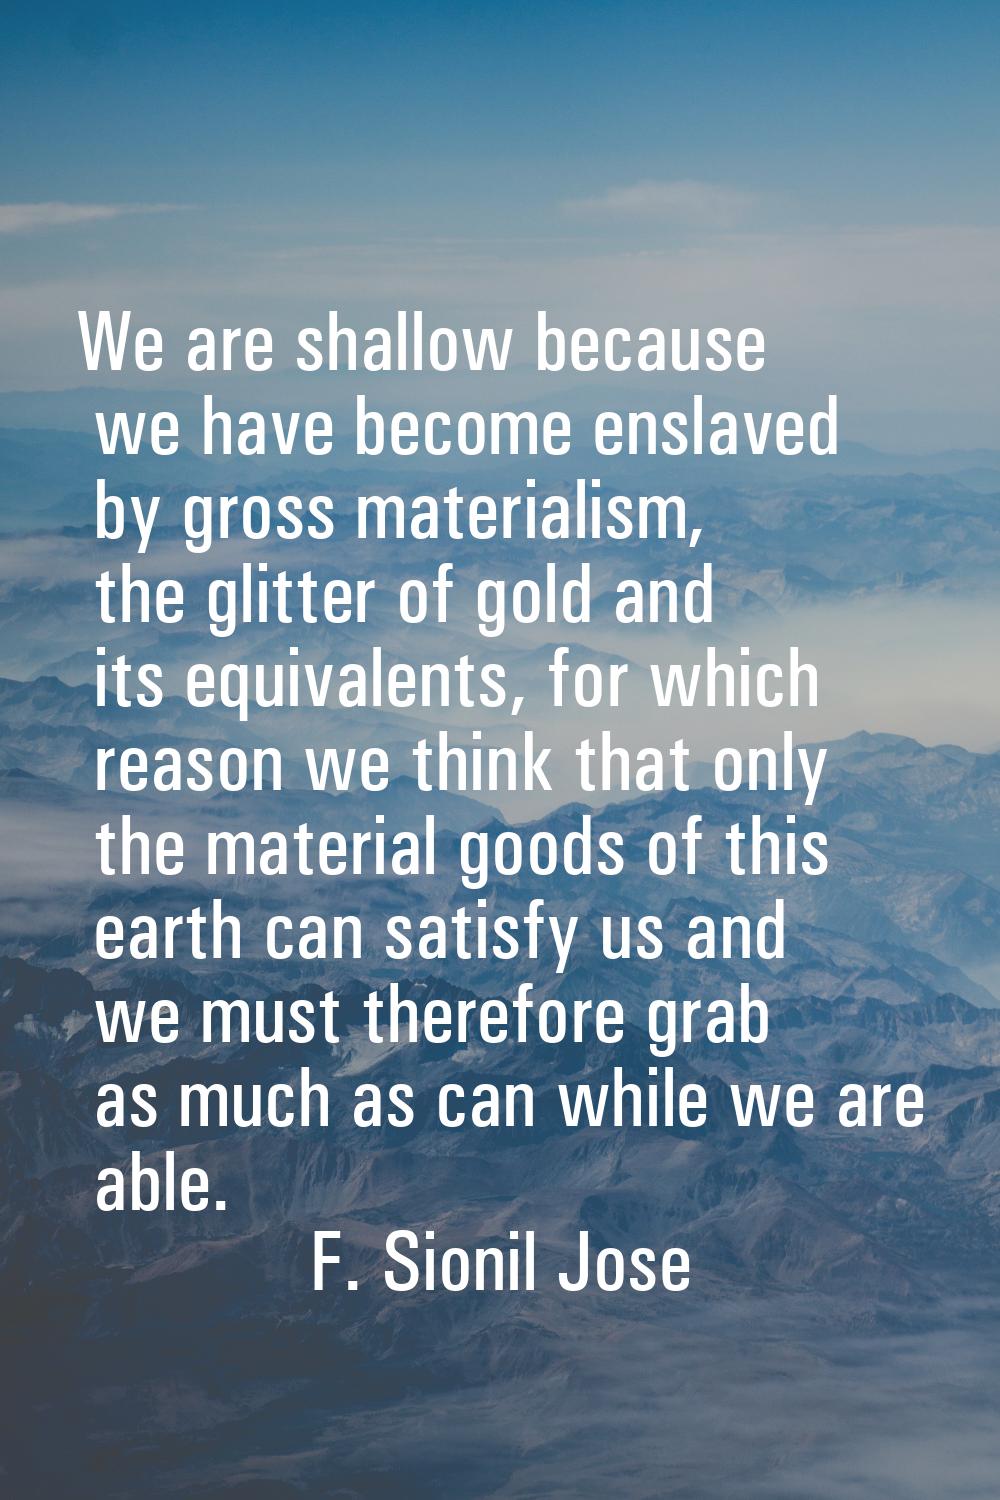 We are shallow because we have become enslaved by gross materialism, the glitter of gold and its eq